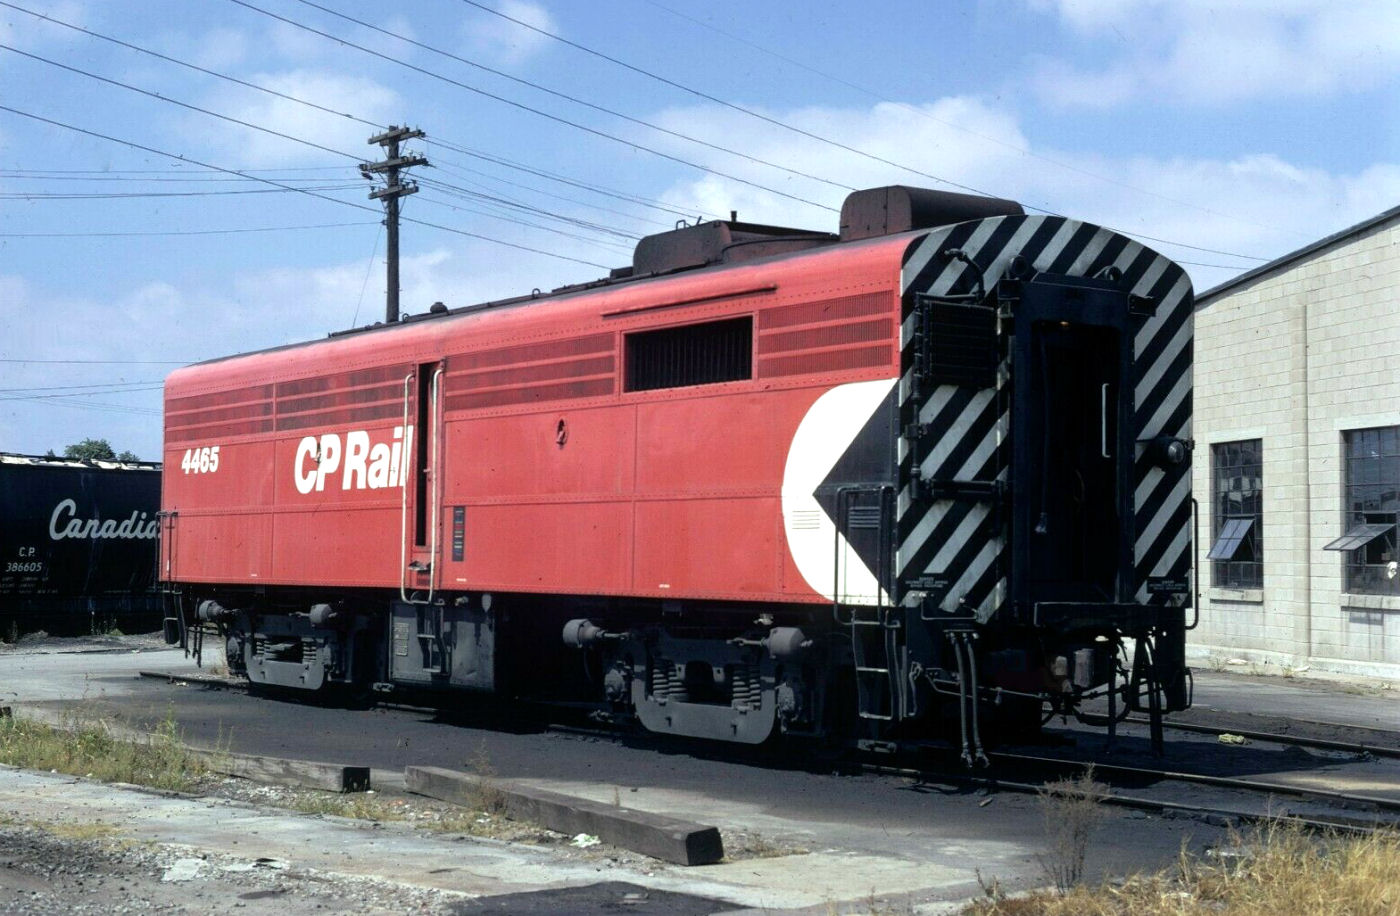 CP 4465 shows B-unit application with small Multimark, and black & white stripes applied to both ends.